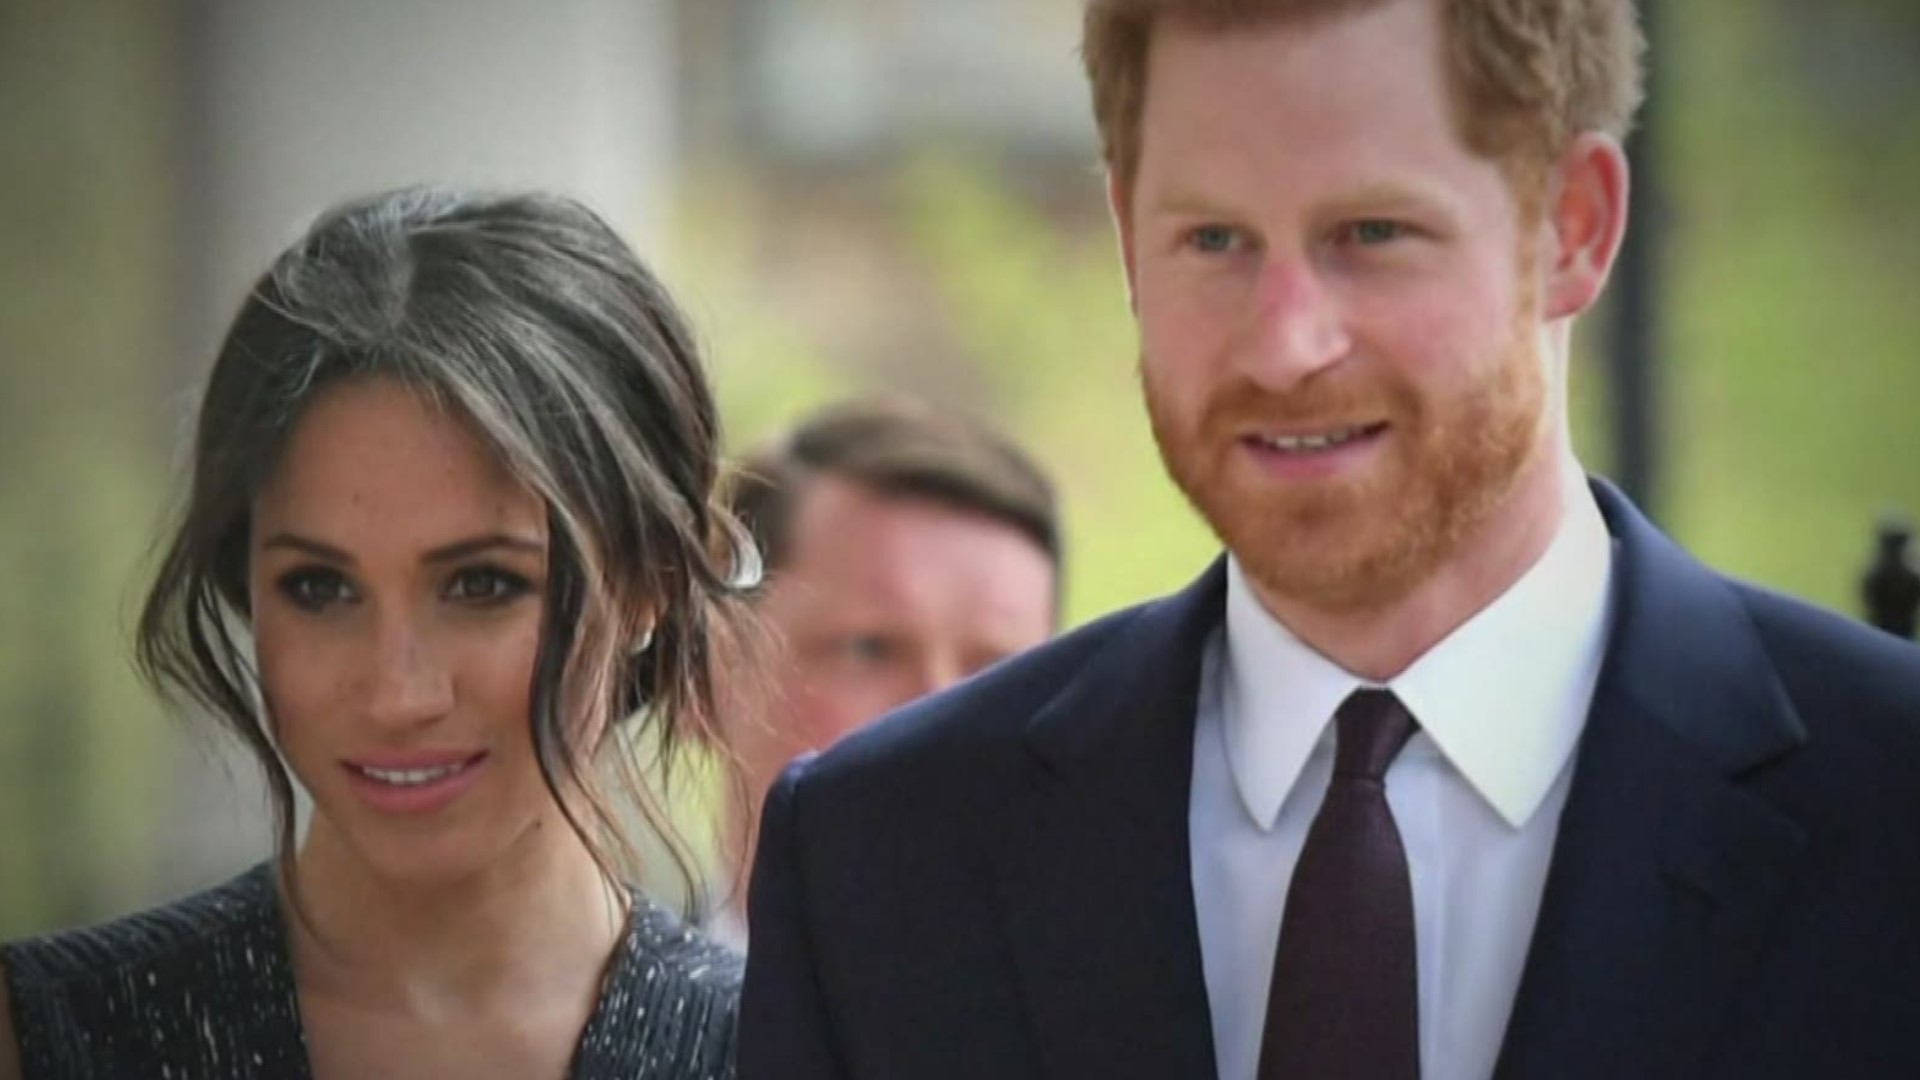 Prince Harry and Meghan announced that Lilibet “Lili” Diana was born Friday morning at a California hospital. She is eighth in line to the British throne.